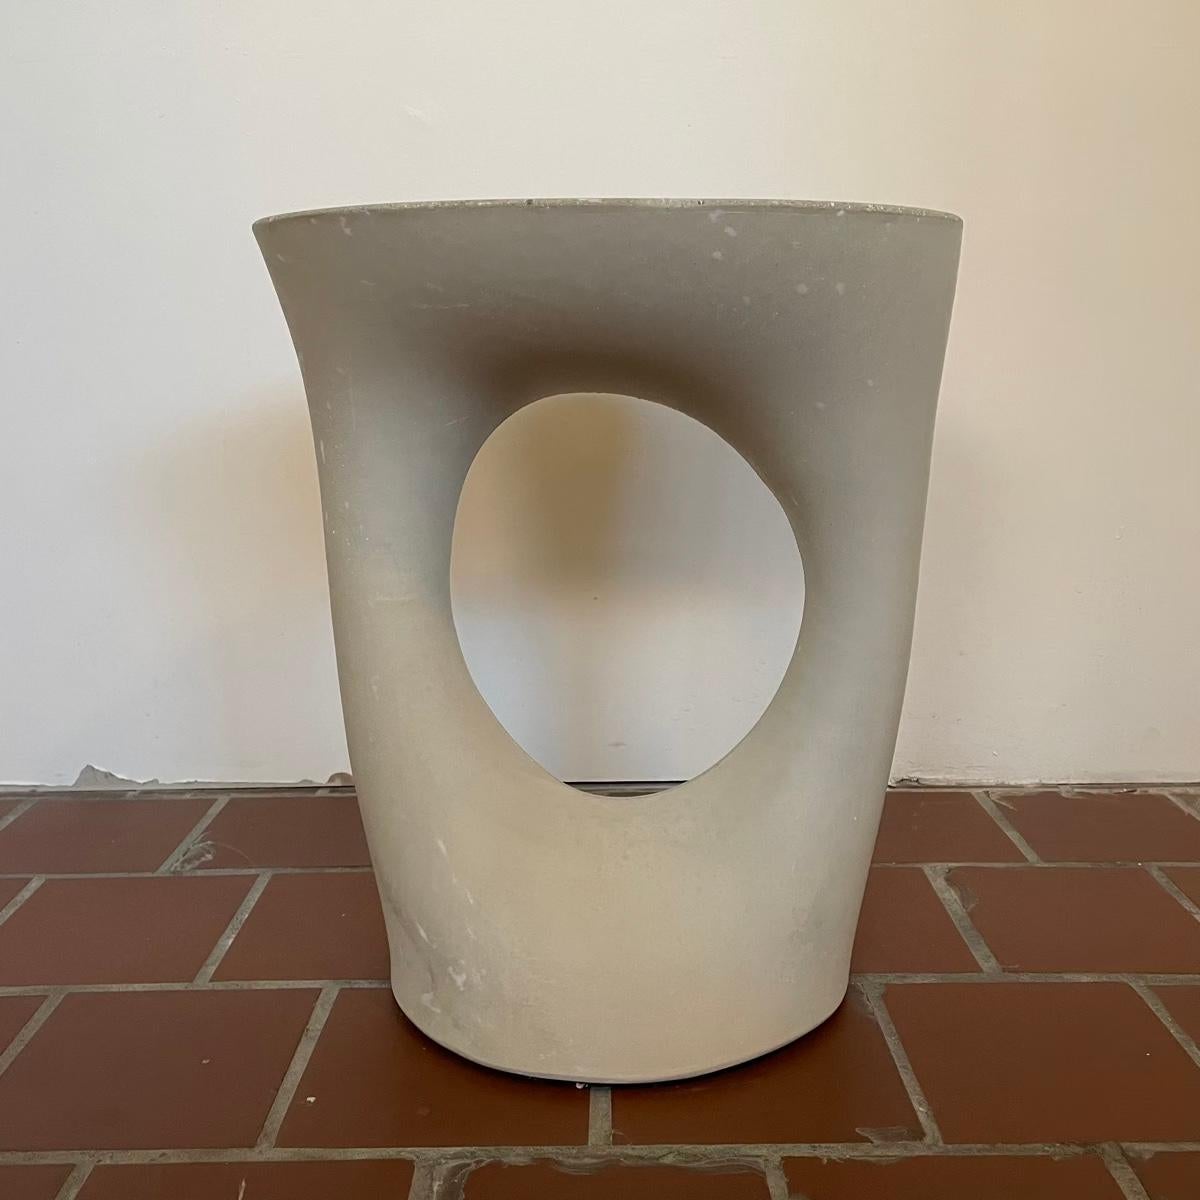 This piece is a factory 2nd. This piece has a few very minor scuff marks and some small air bubbles that were patched with plaster. Overall it's in excellent condition.

Industrial, organic and sculptural, the Kreten side tables are concrete